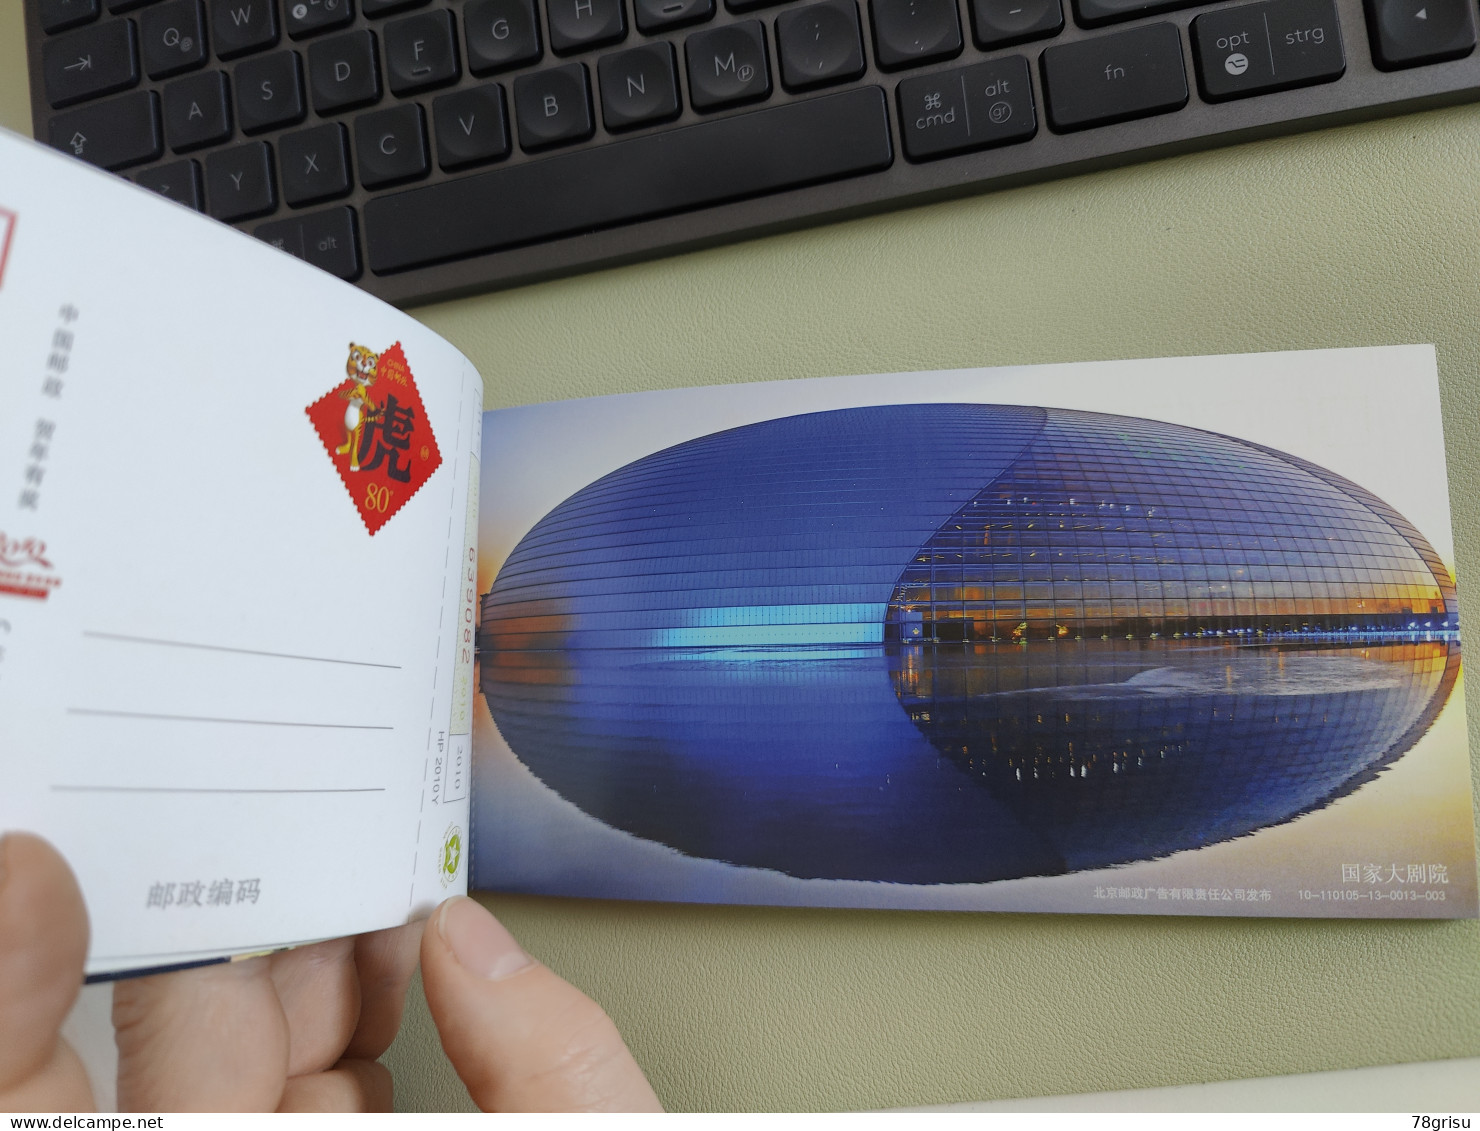 China, Beijing 2008, 10 Postcard Sailing in Qingdao ,Olympique,Olympic Games Olympia JO